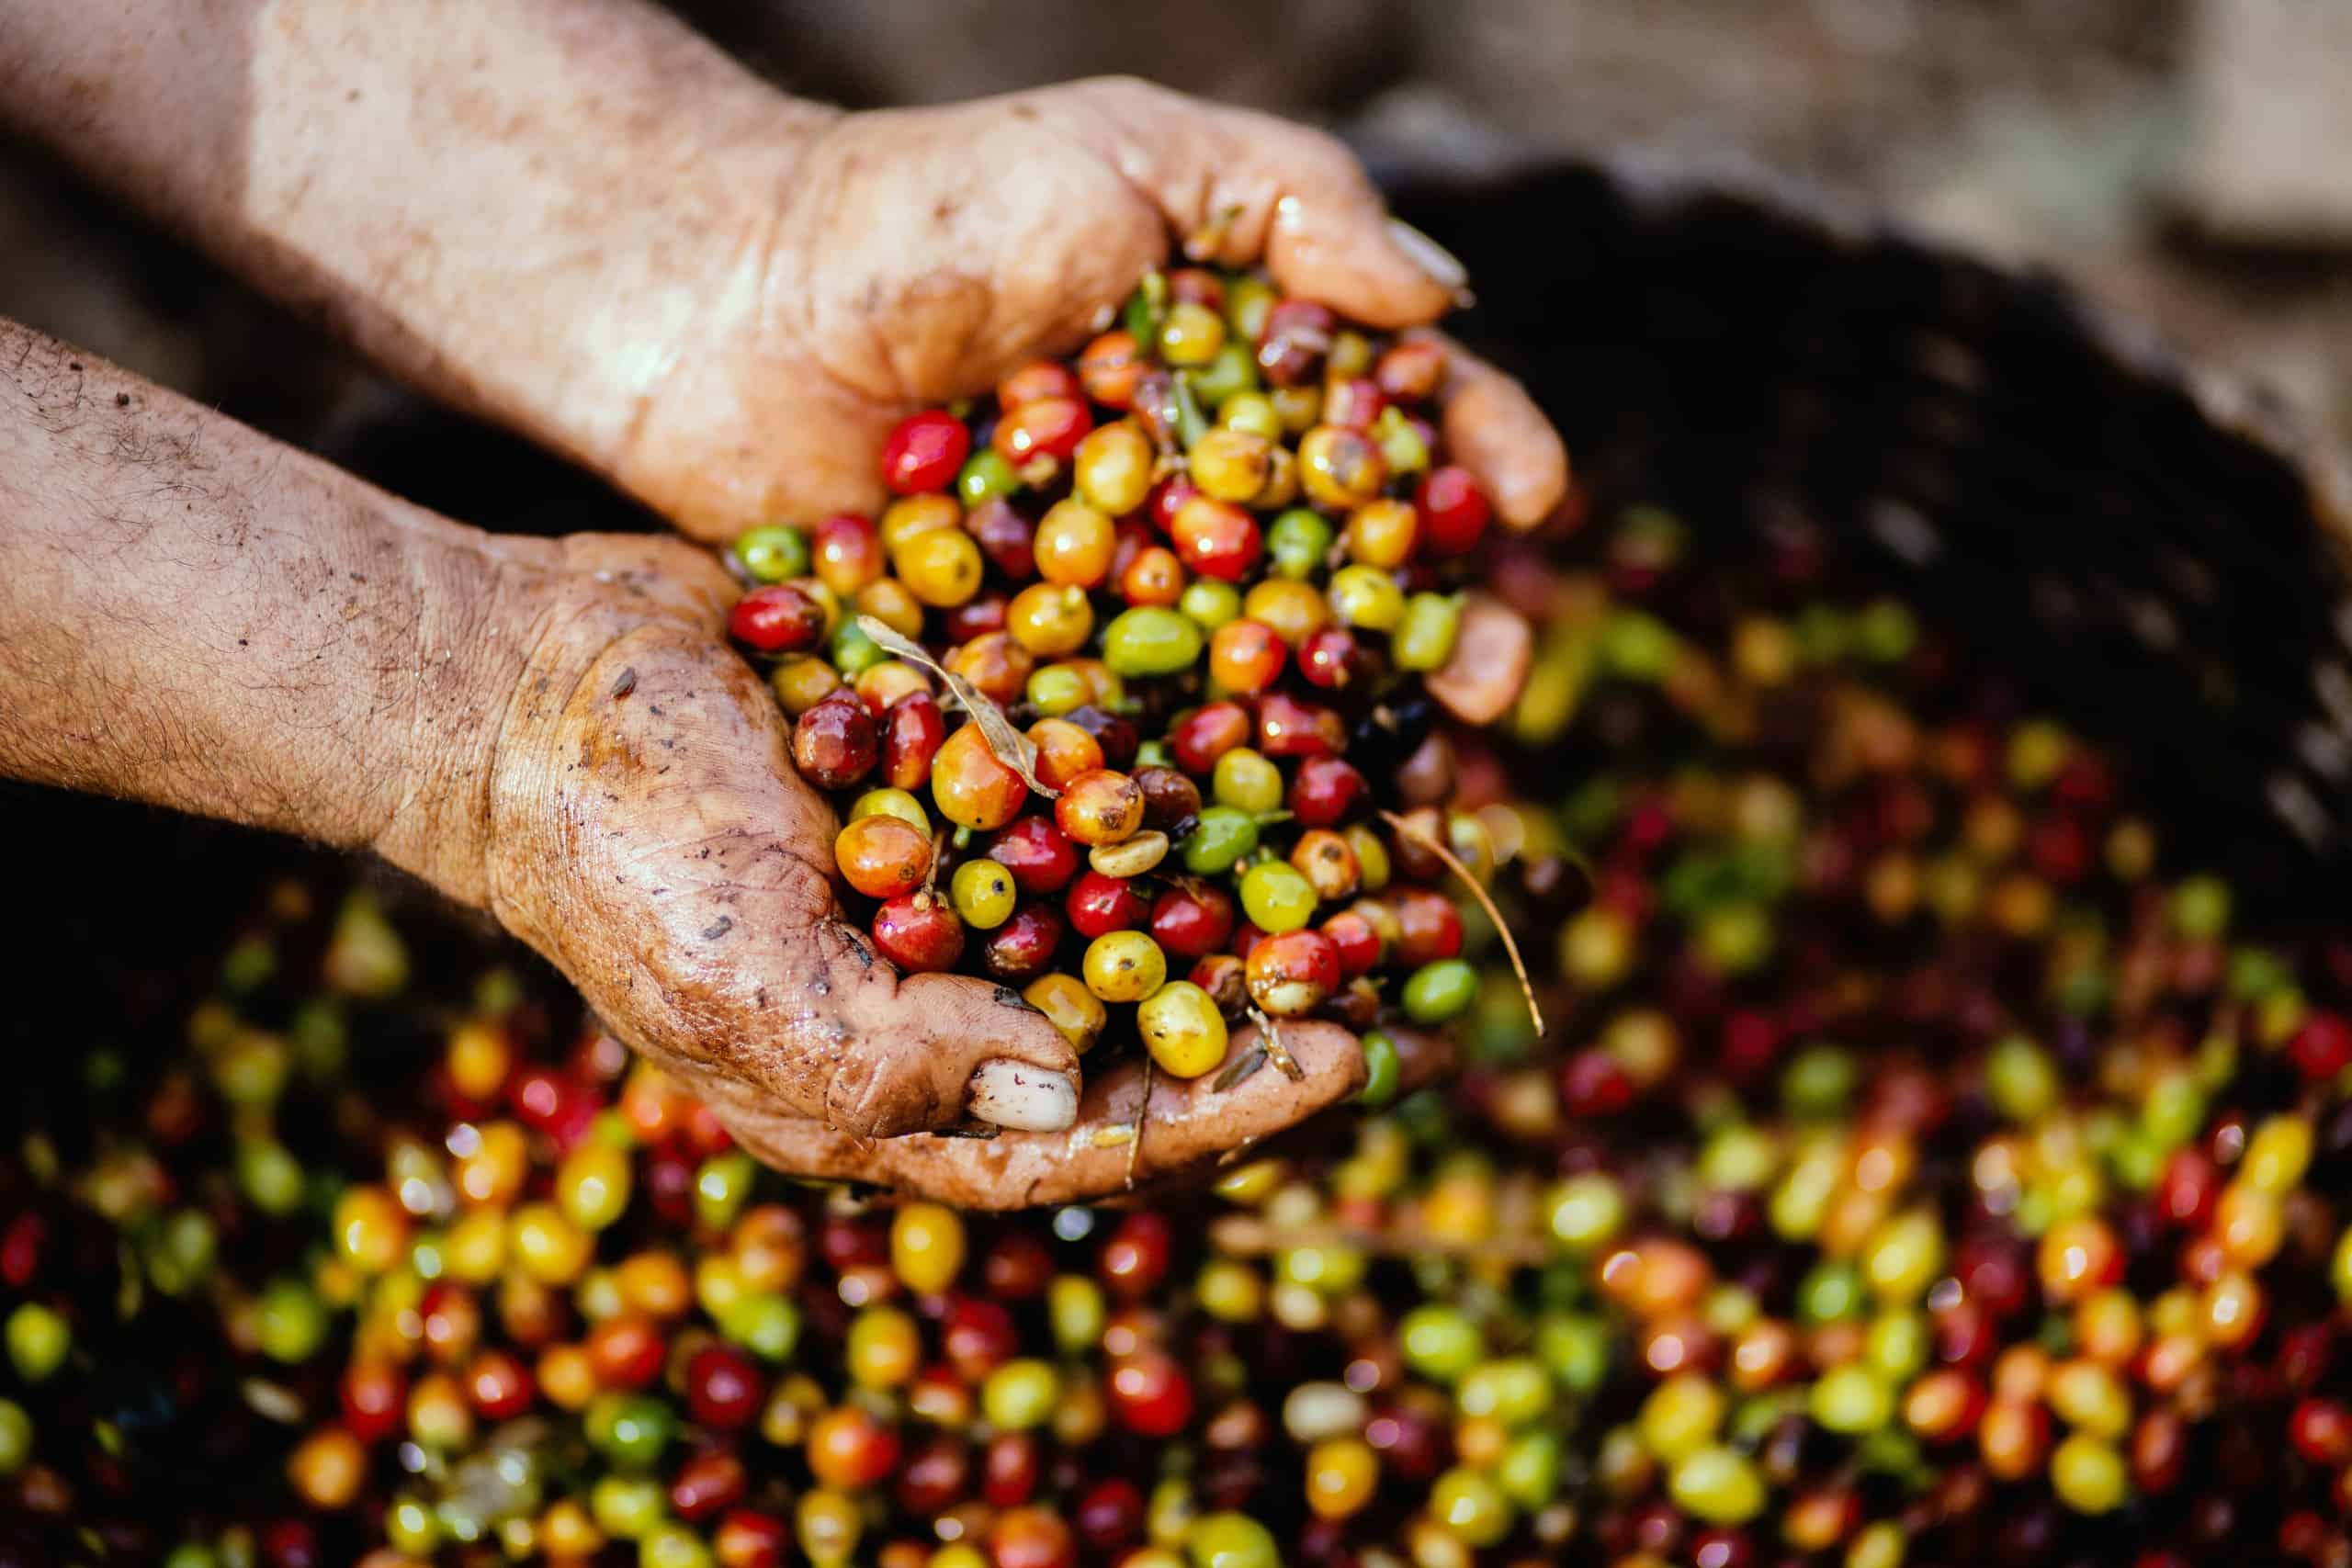 A Guide to Buying Ethical Coffee